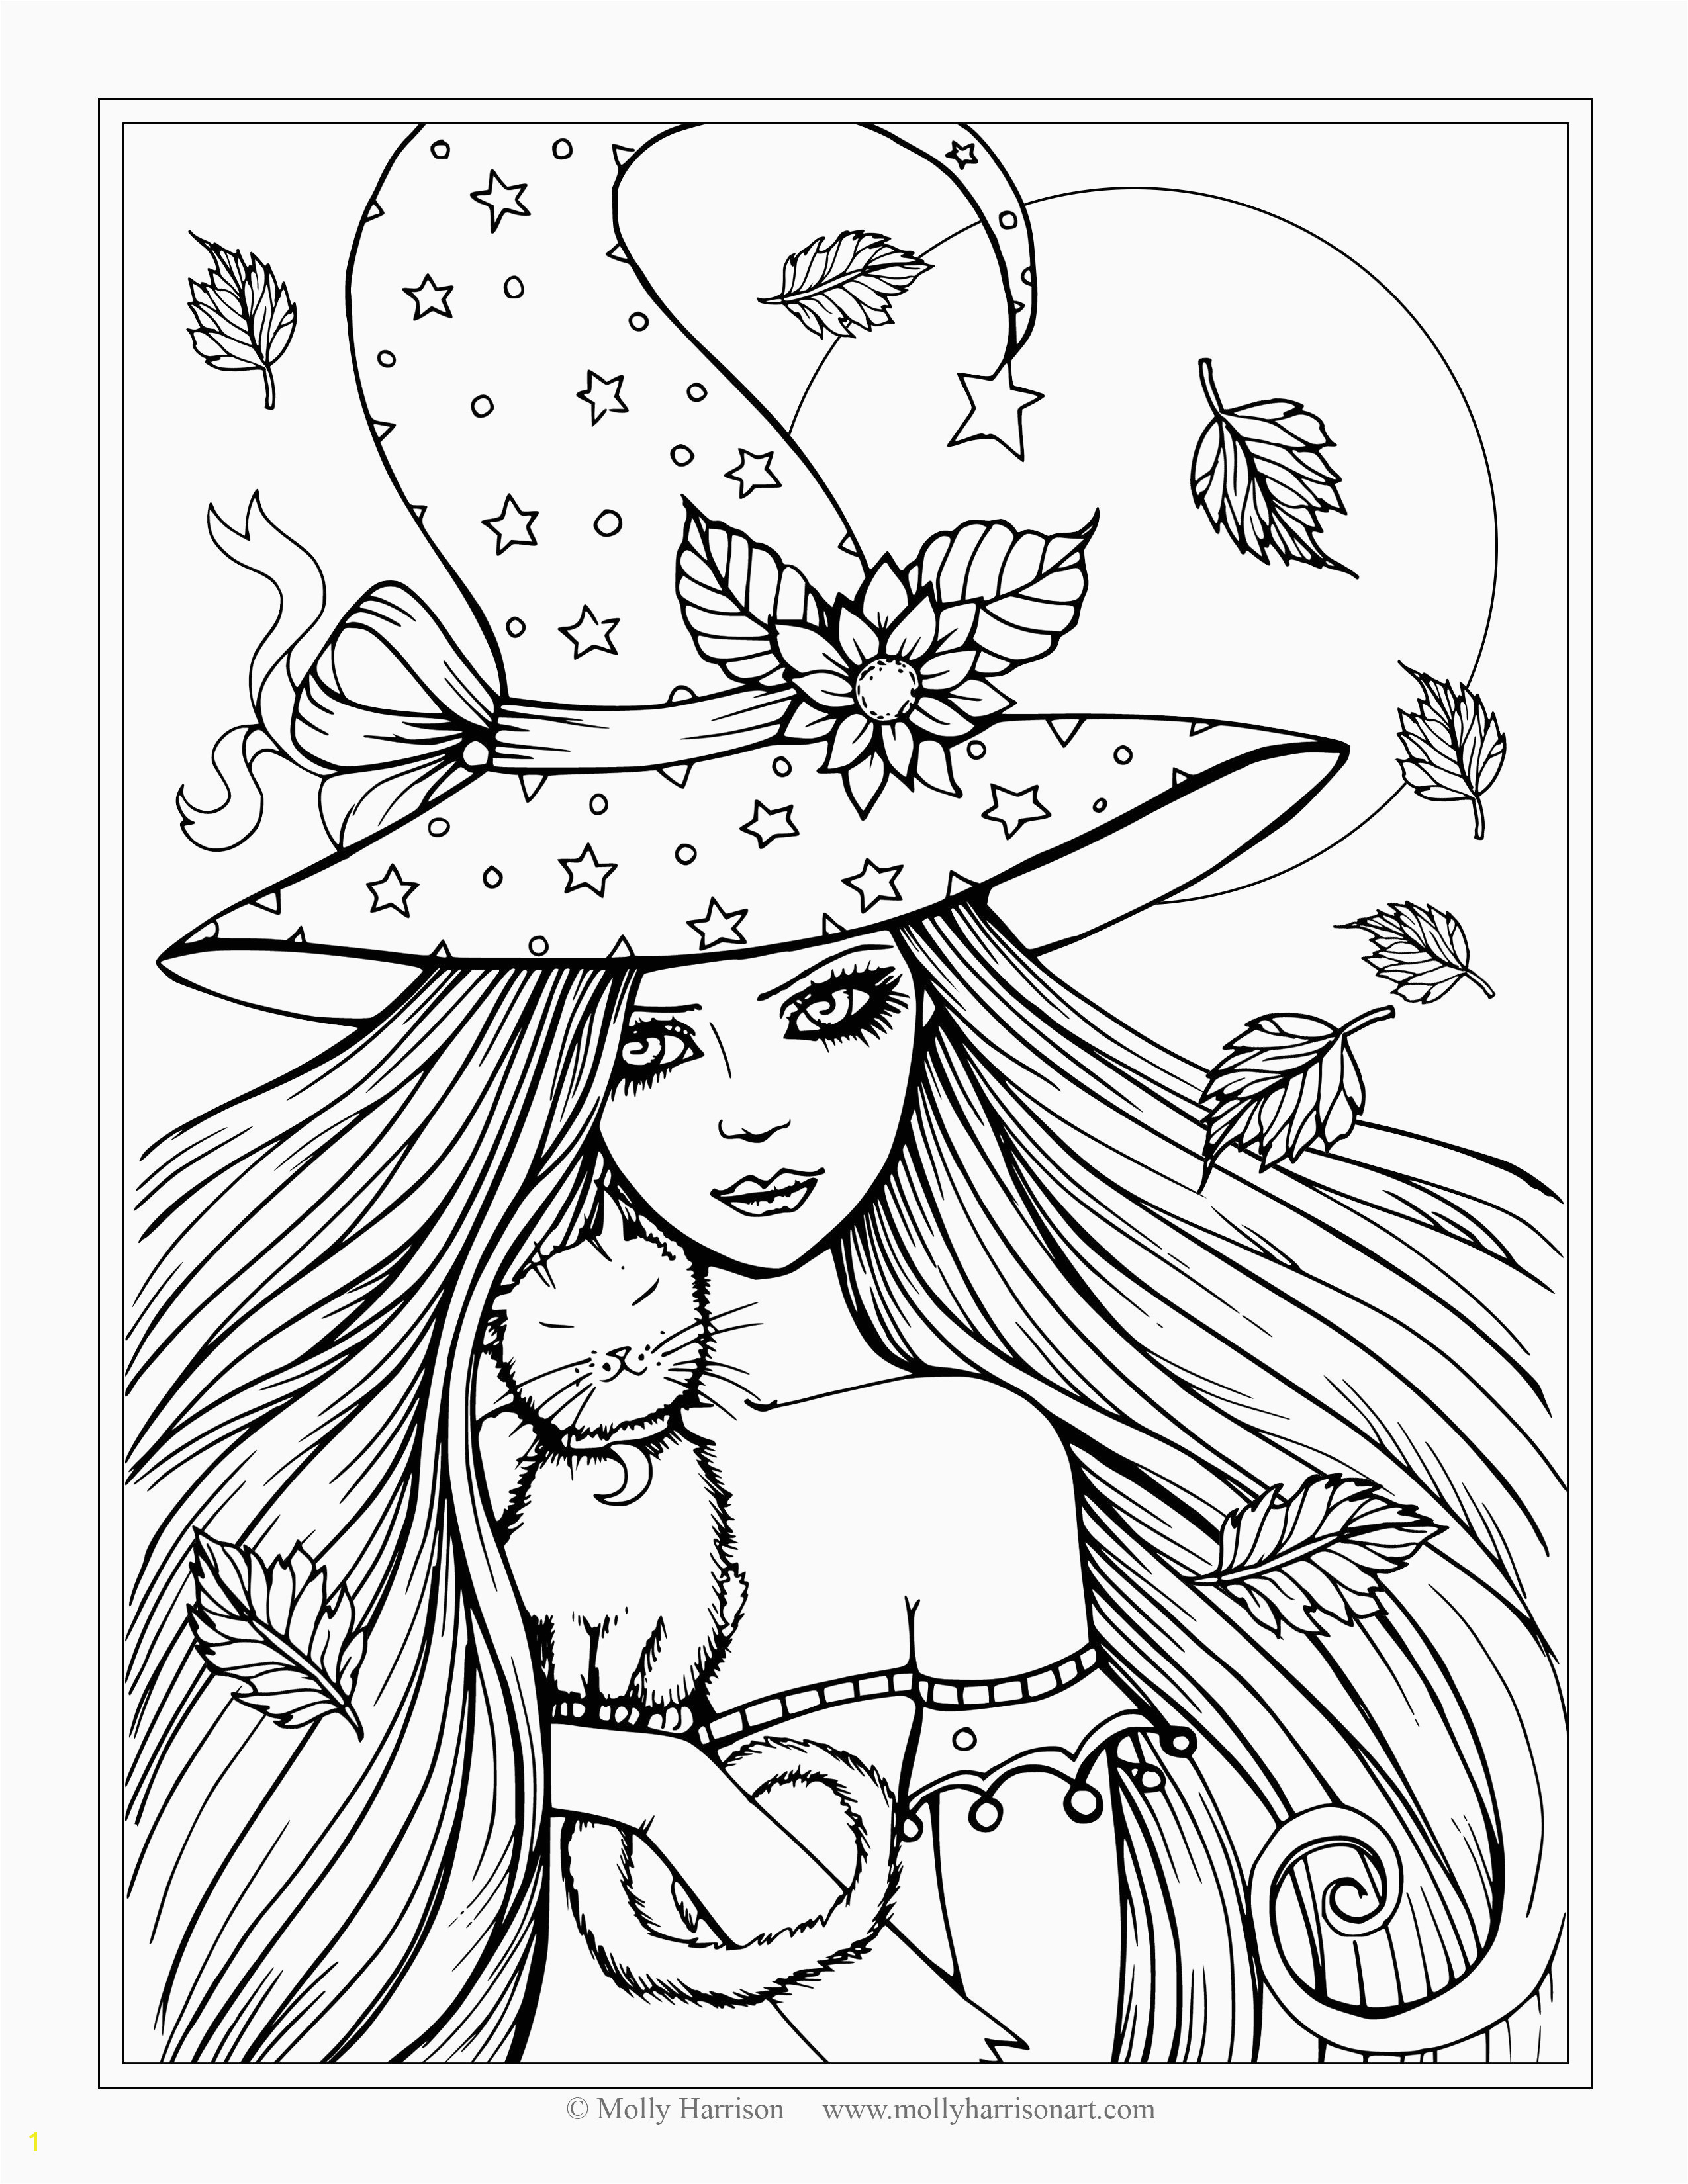 Kazoops Coloring Pages Coloring Pages with Details Best Free Pumpkin Coloring Pages